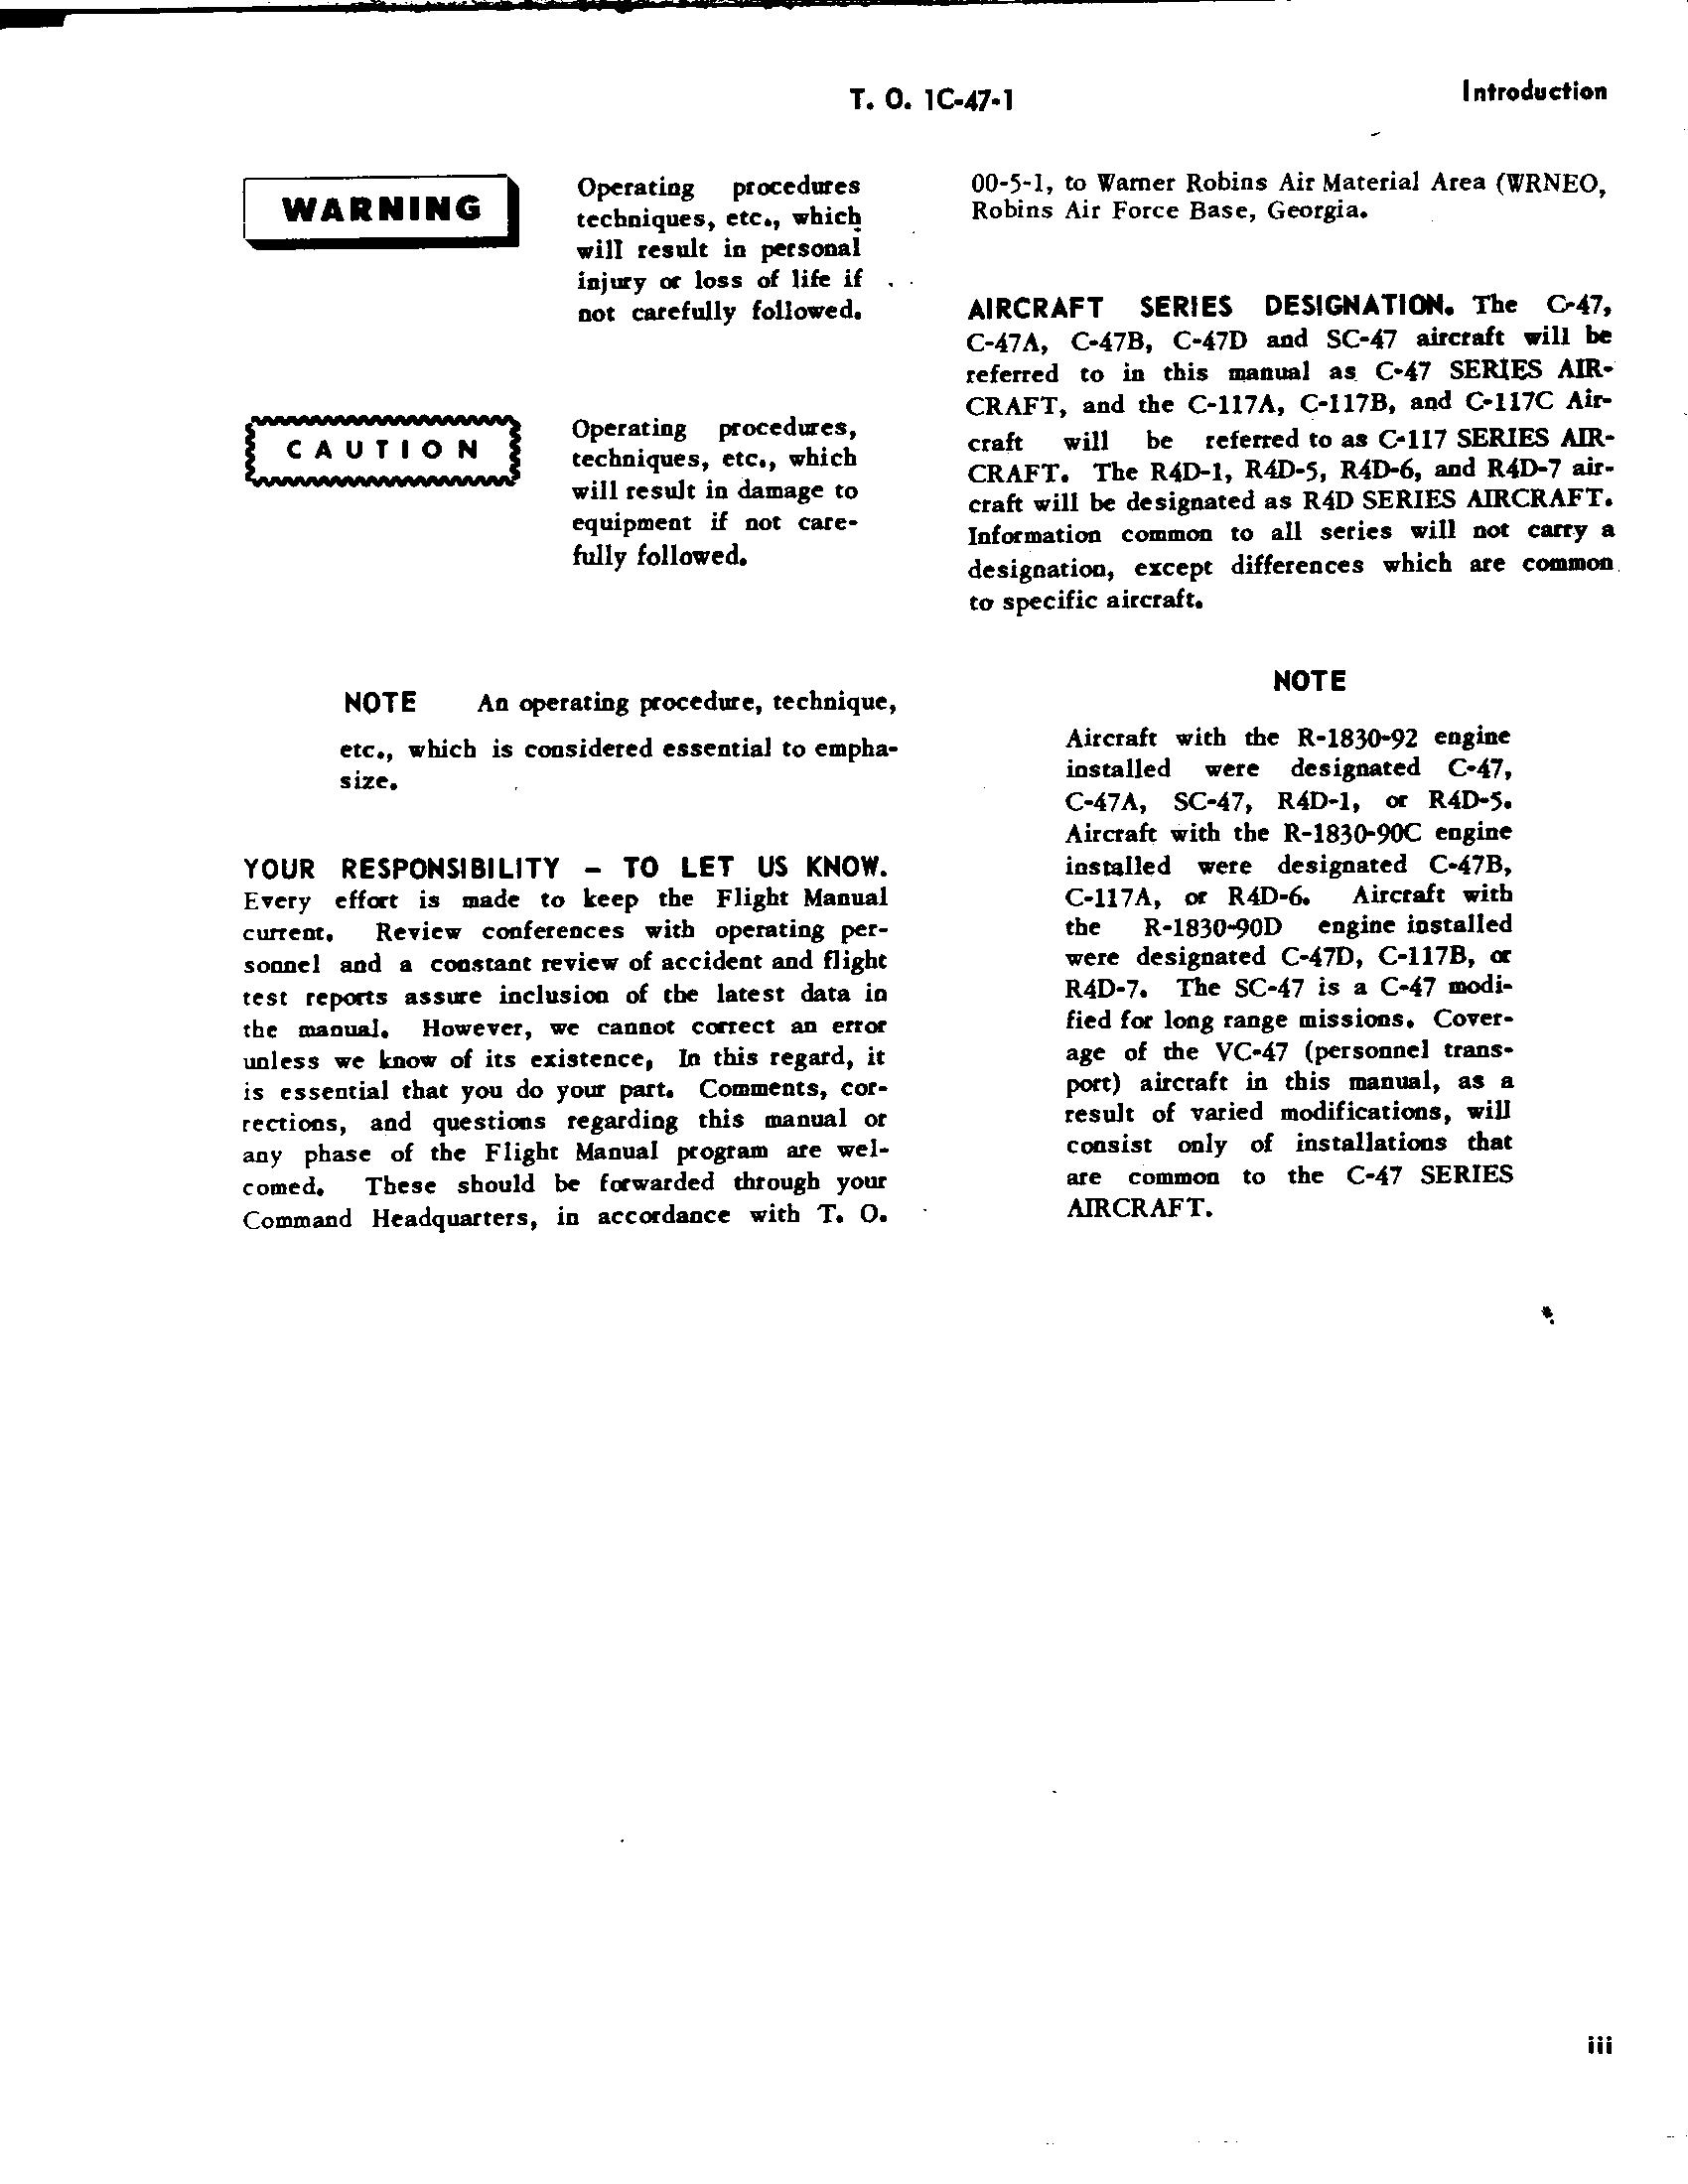 Sample page 5 from AirCorps Library document: Flight Manual for C-47, HC-47, C-117, R4D, and TC-47